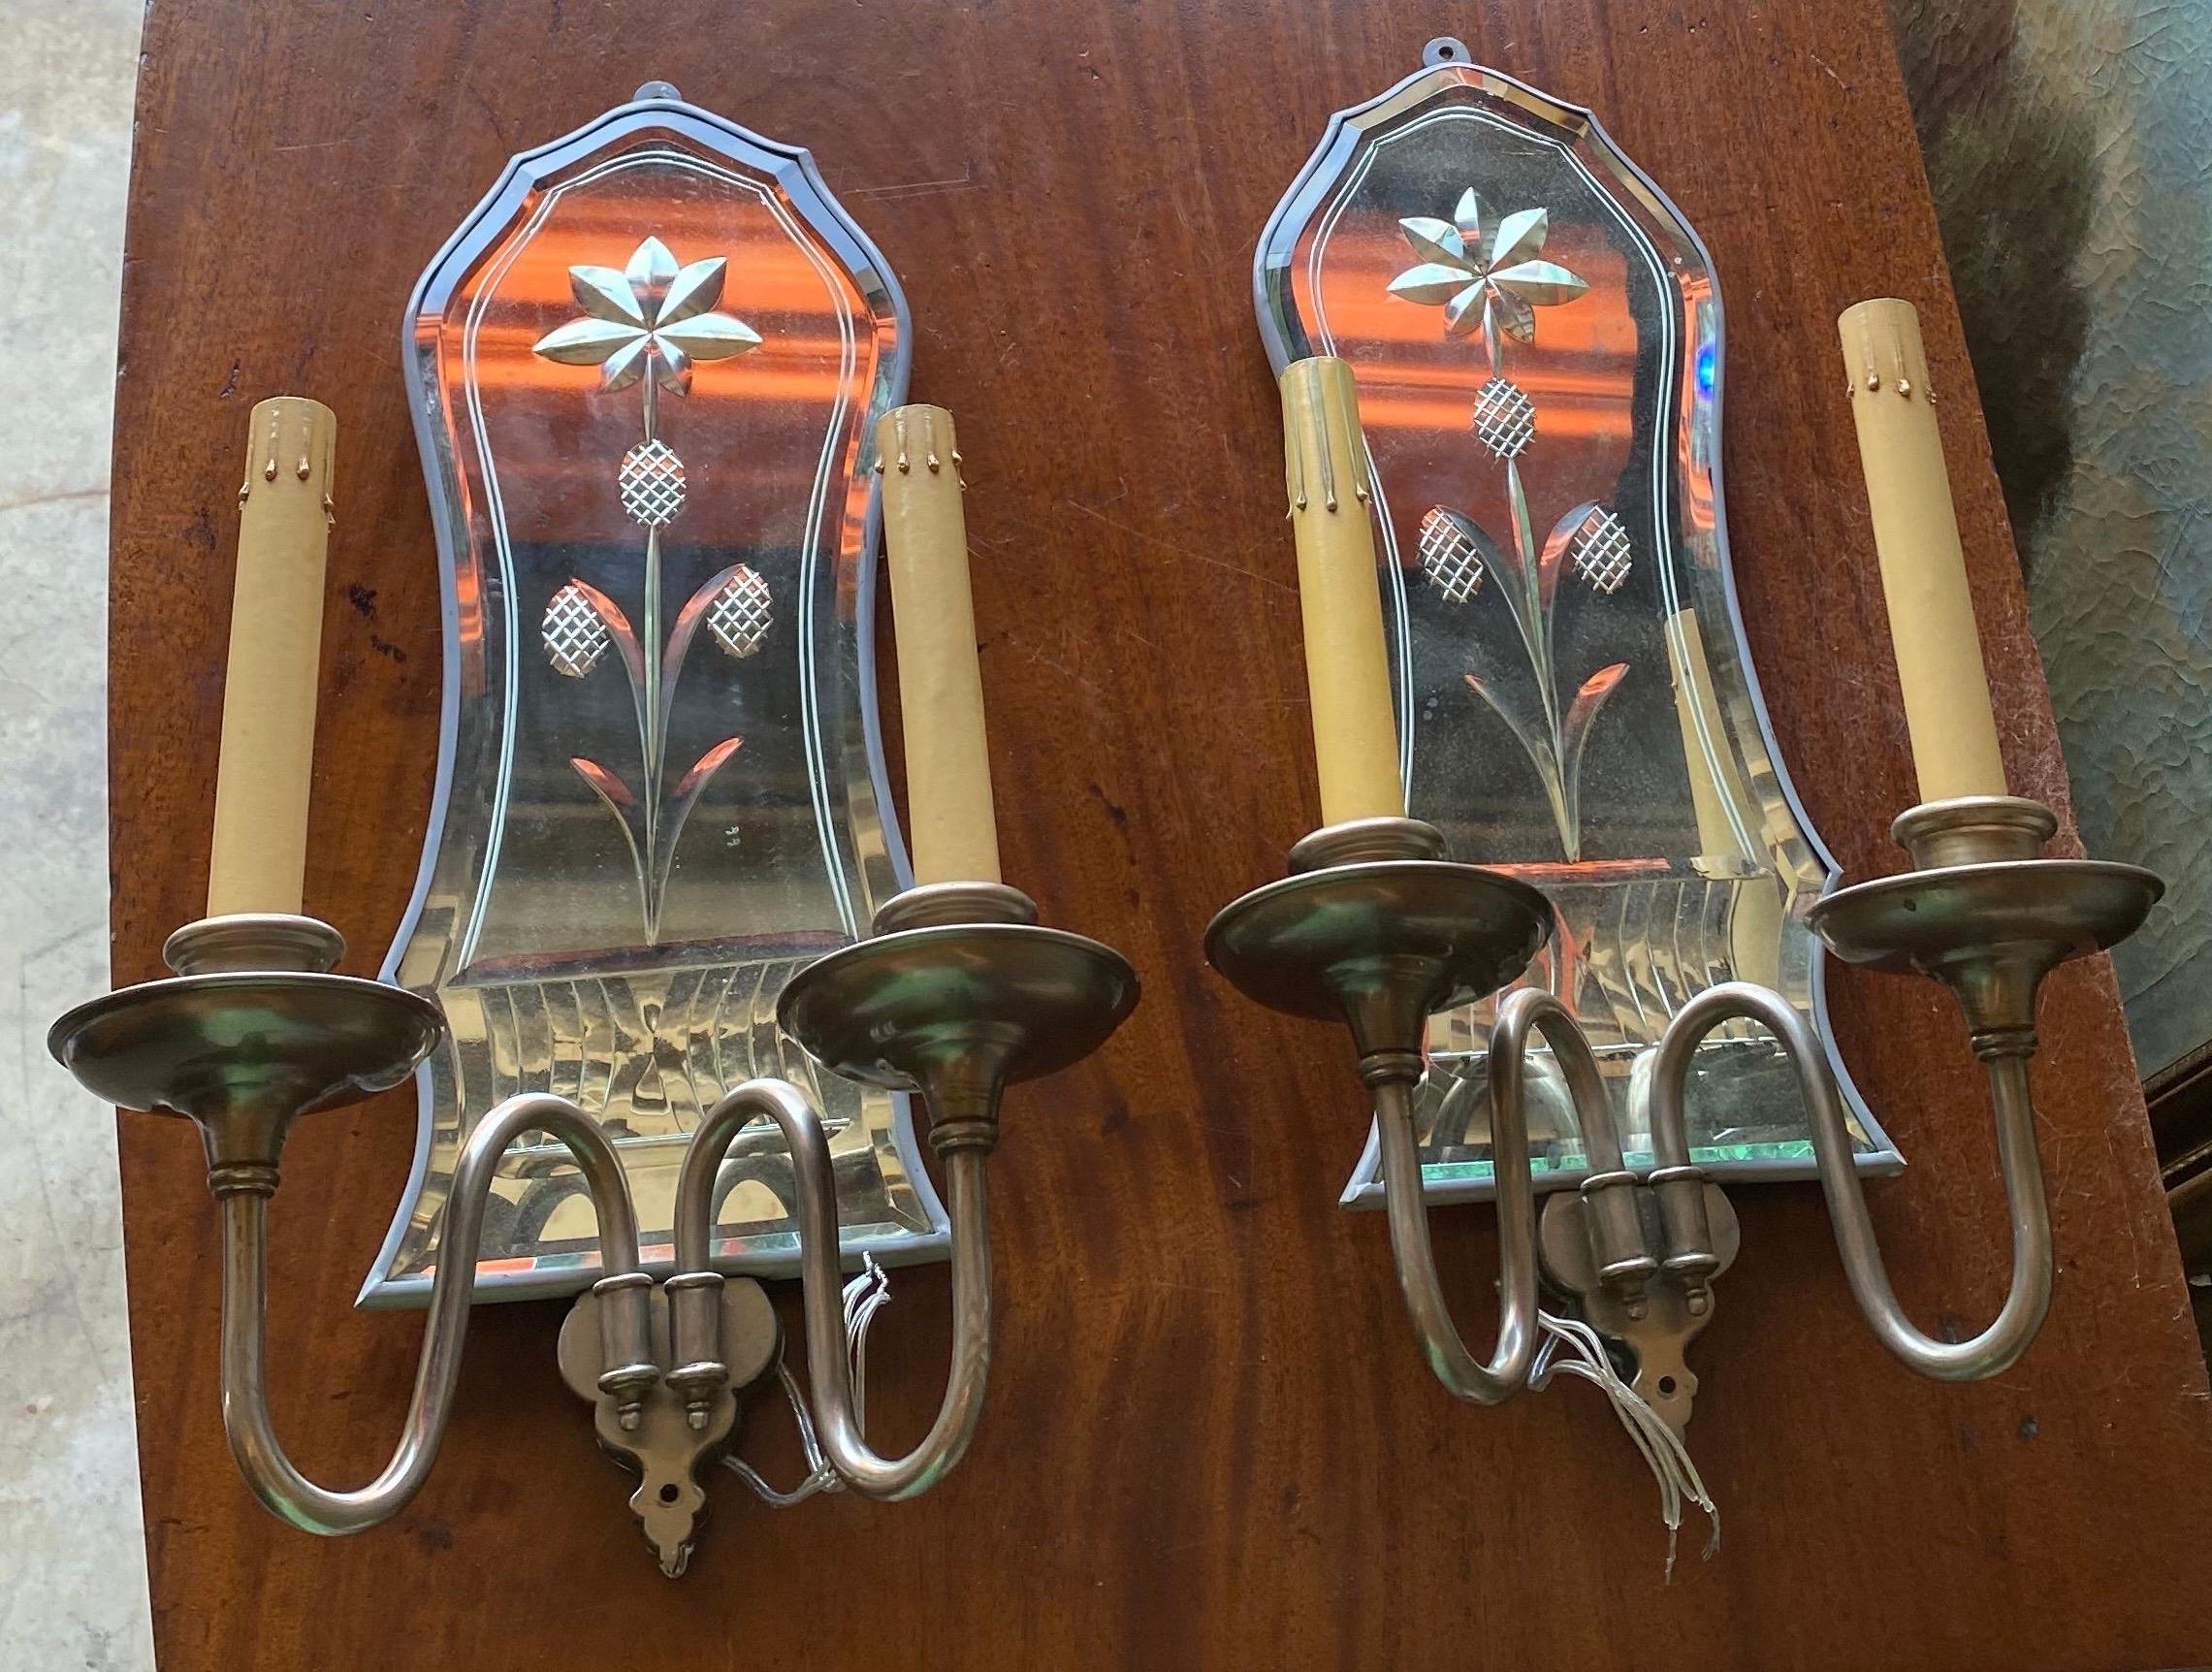 Great pair of etched mirror sconces. Probably American made in the mid-20th century.